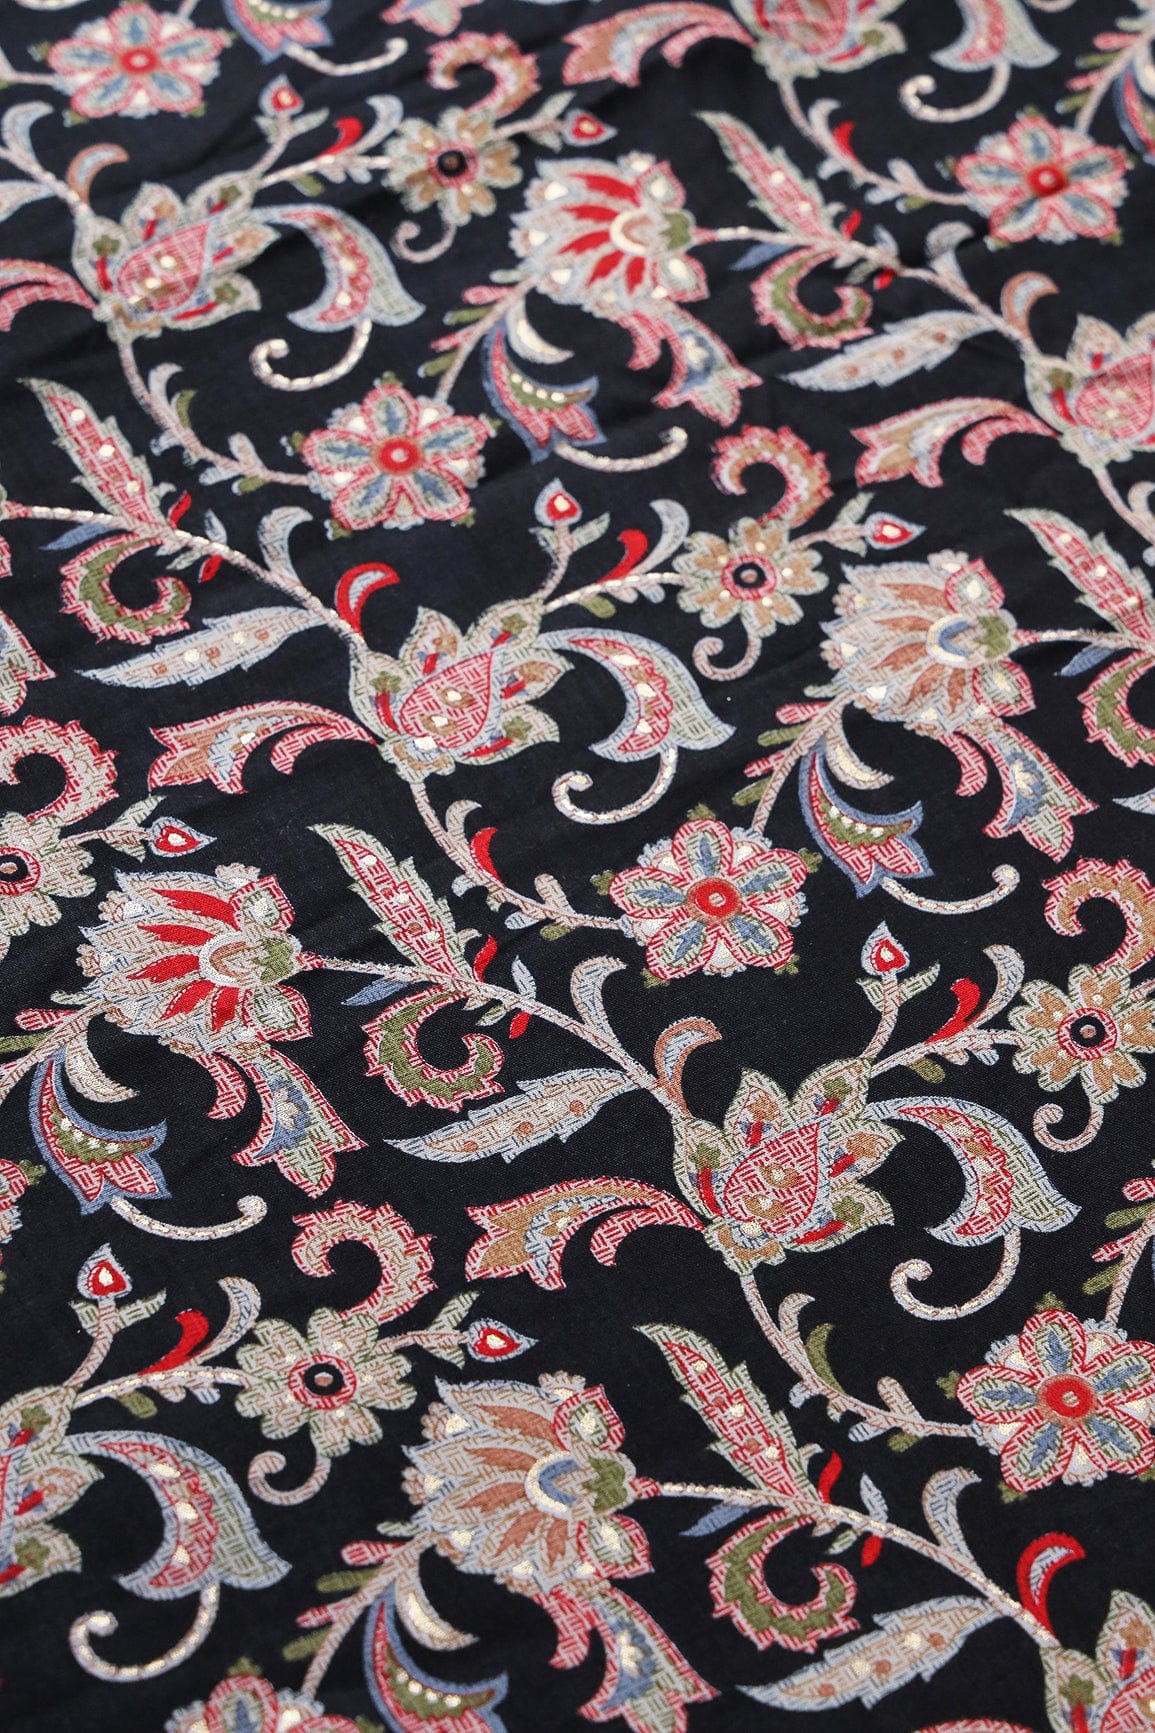 doeraa Prints Multi Color Floral Pattern With Foil Print On Black Rayon Fabric